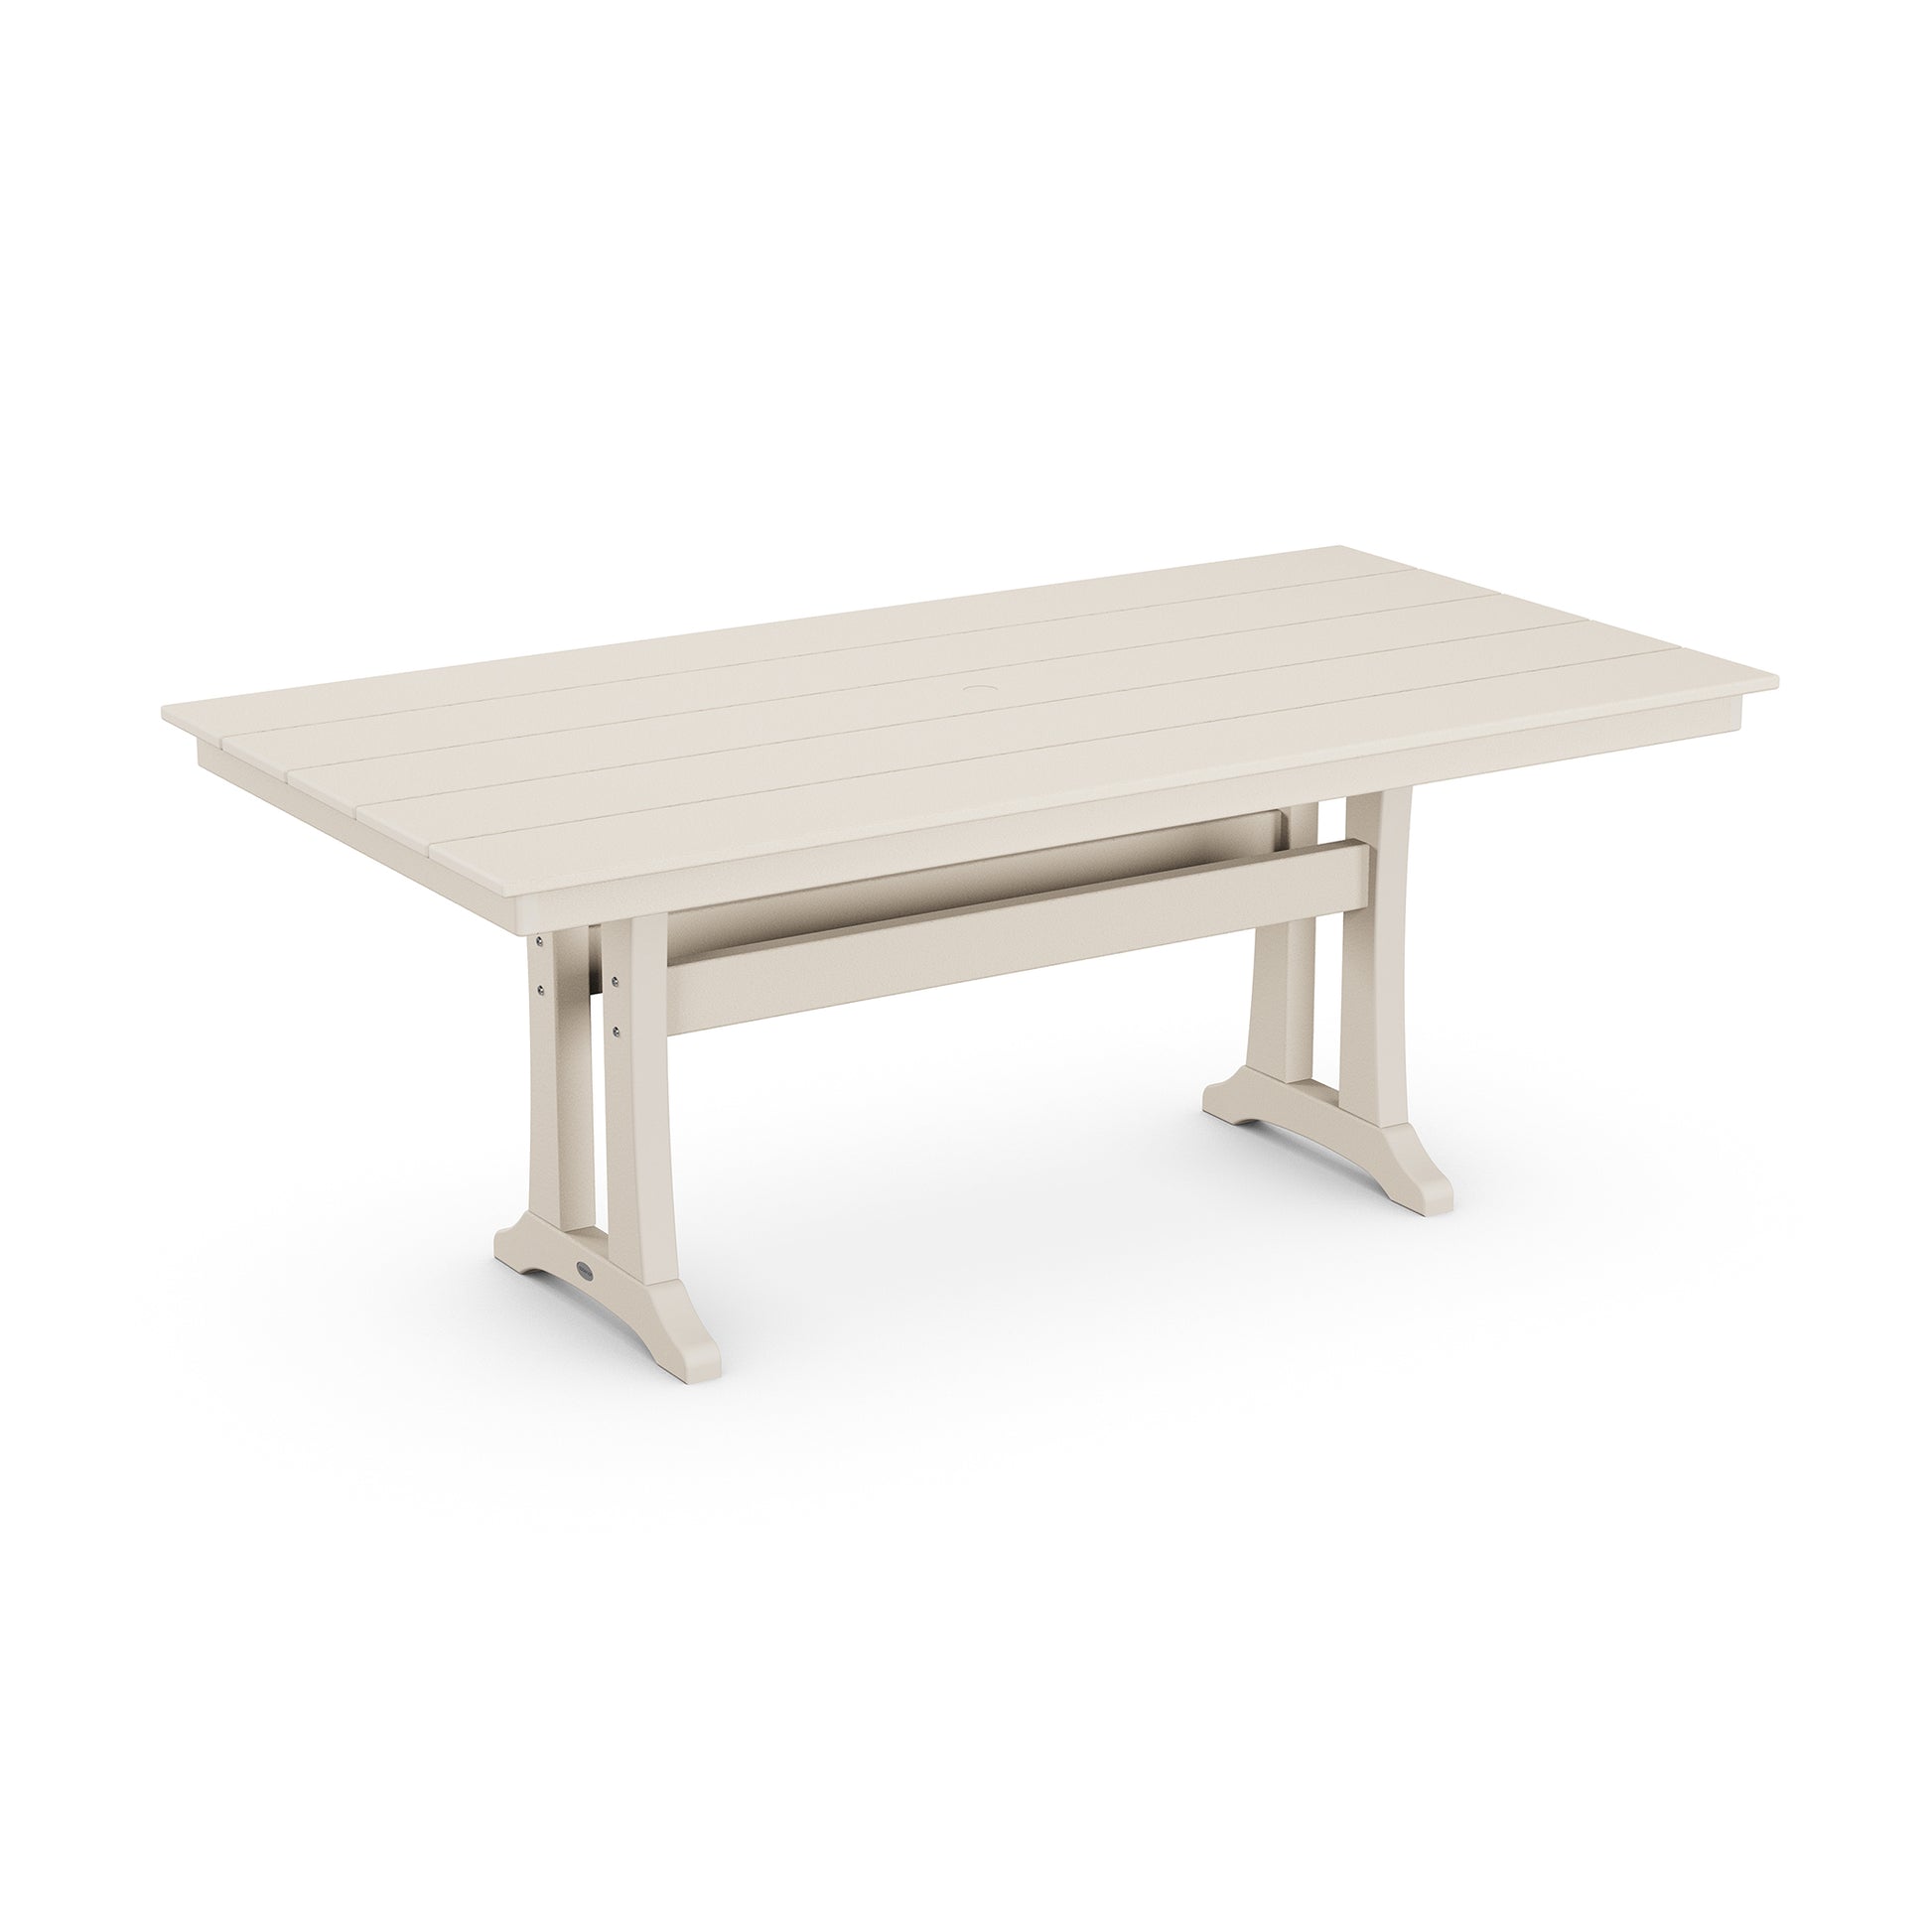 A modern, extendable POLYWOOD Farmhouse Trestle 37" x 72" outdoor dining table with a light beige tabletop and contrasting light gray pedestal legs, isolated on a white background.